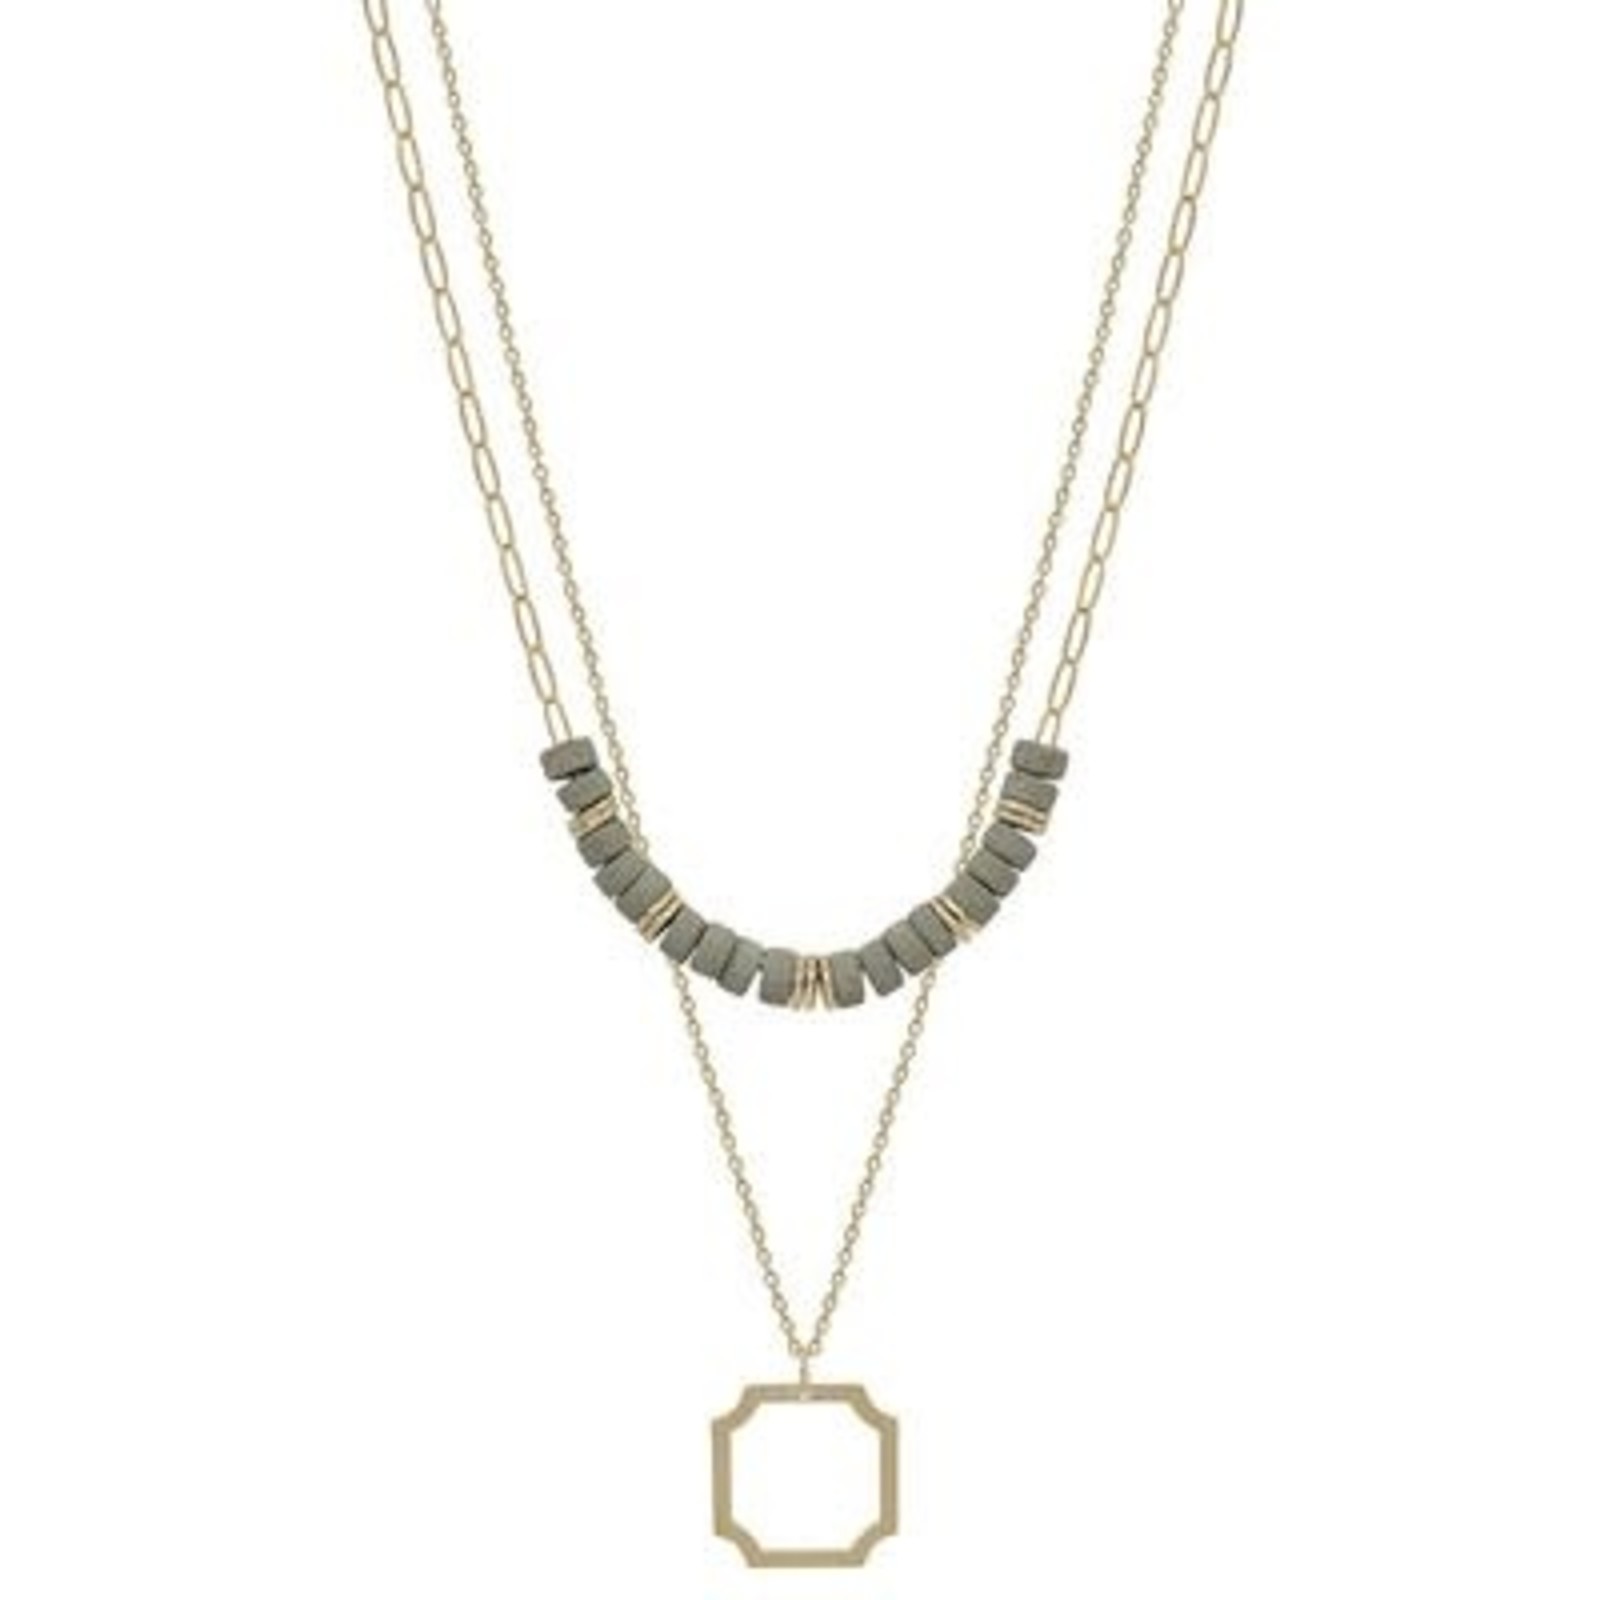 Meghan Browne AVERY GRAY NECKLACE 6-18"  AVE-GR loading=